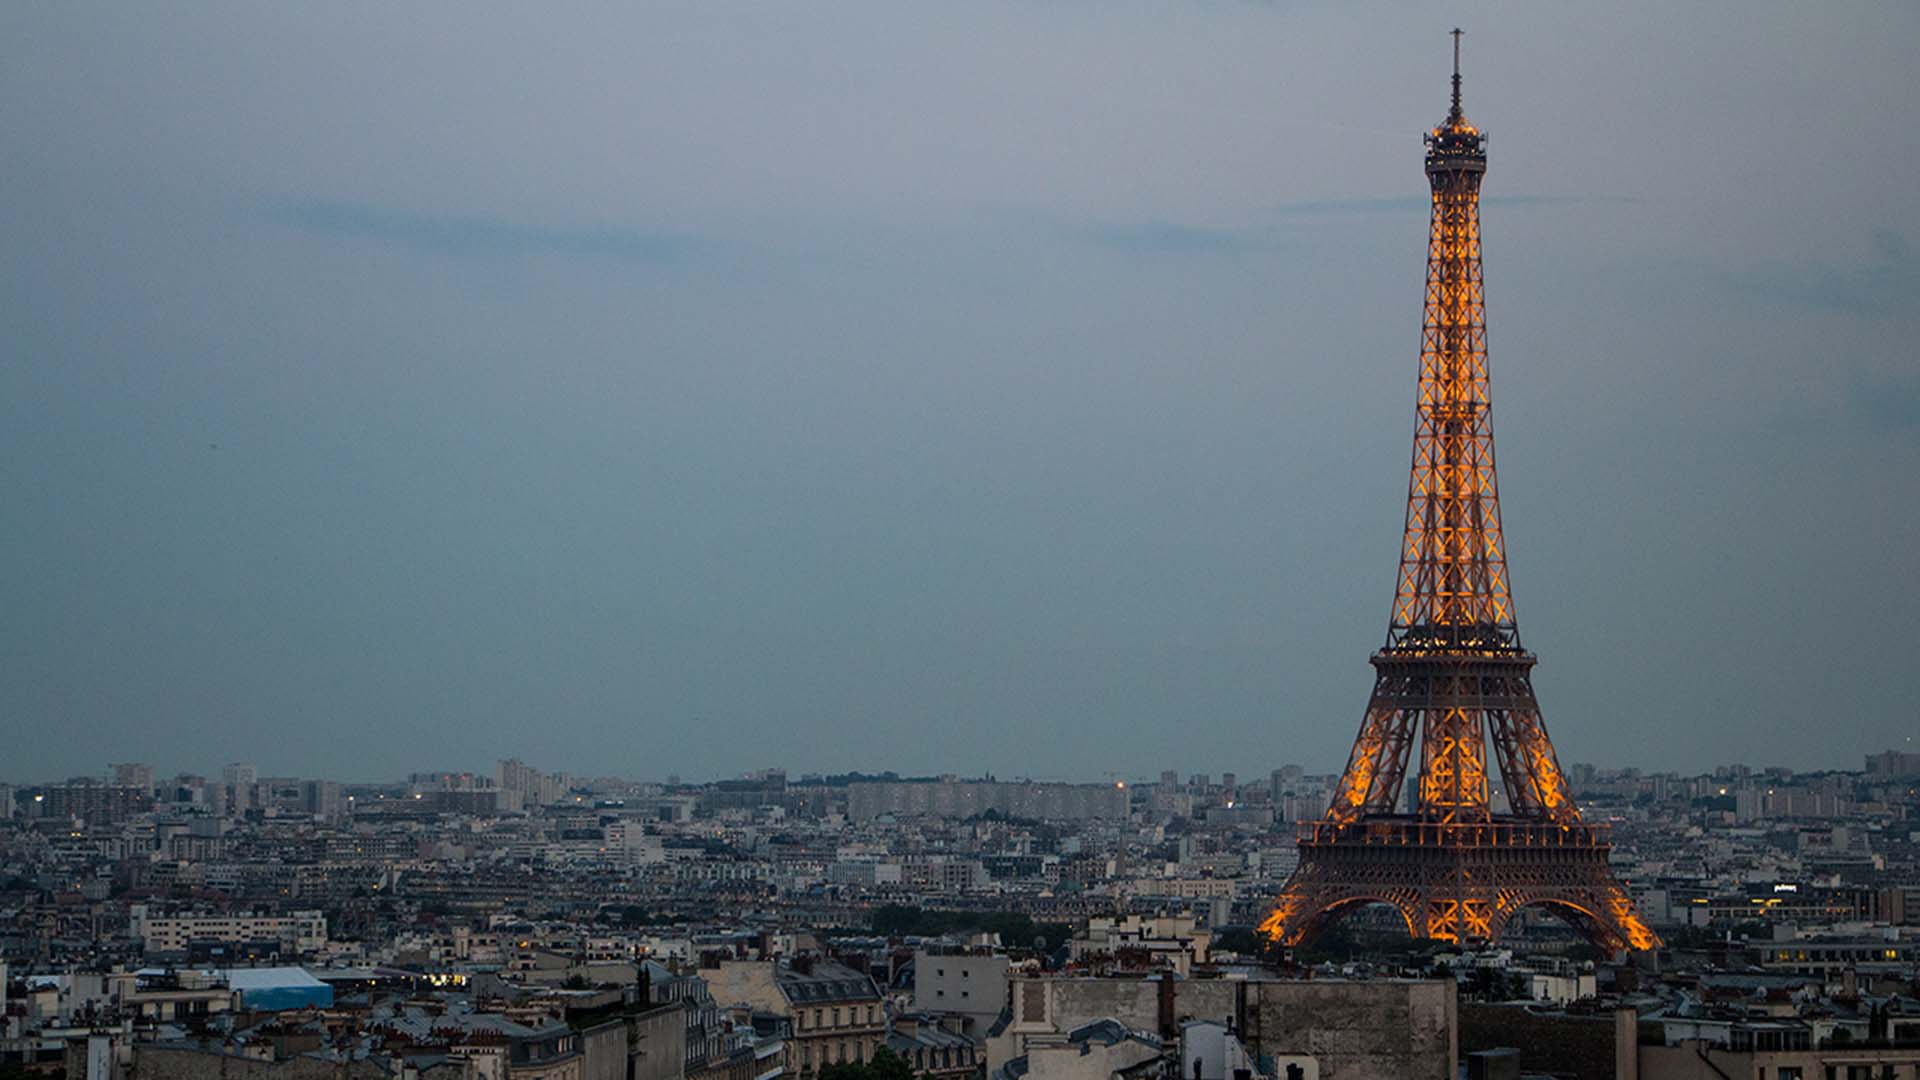 Cityscape of Paris with Eiffel tower